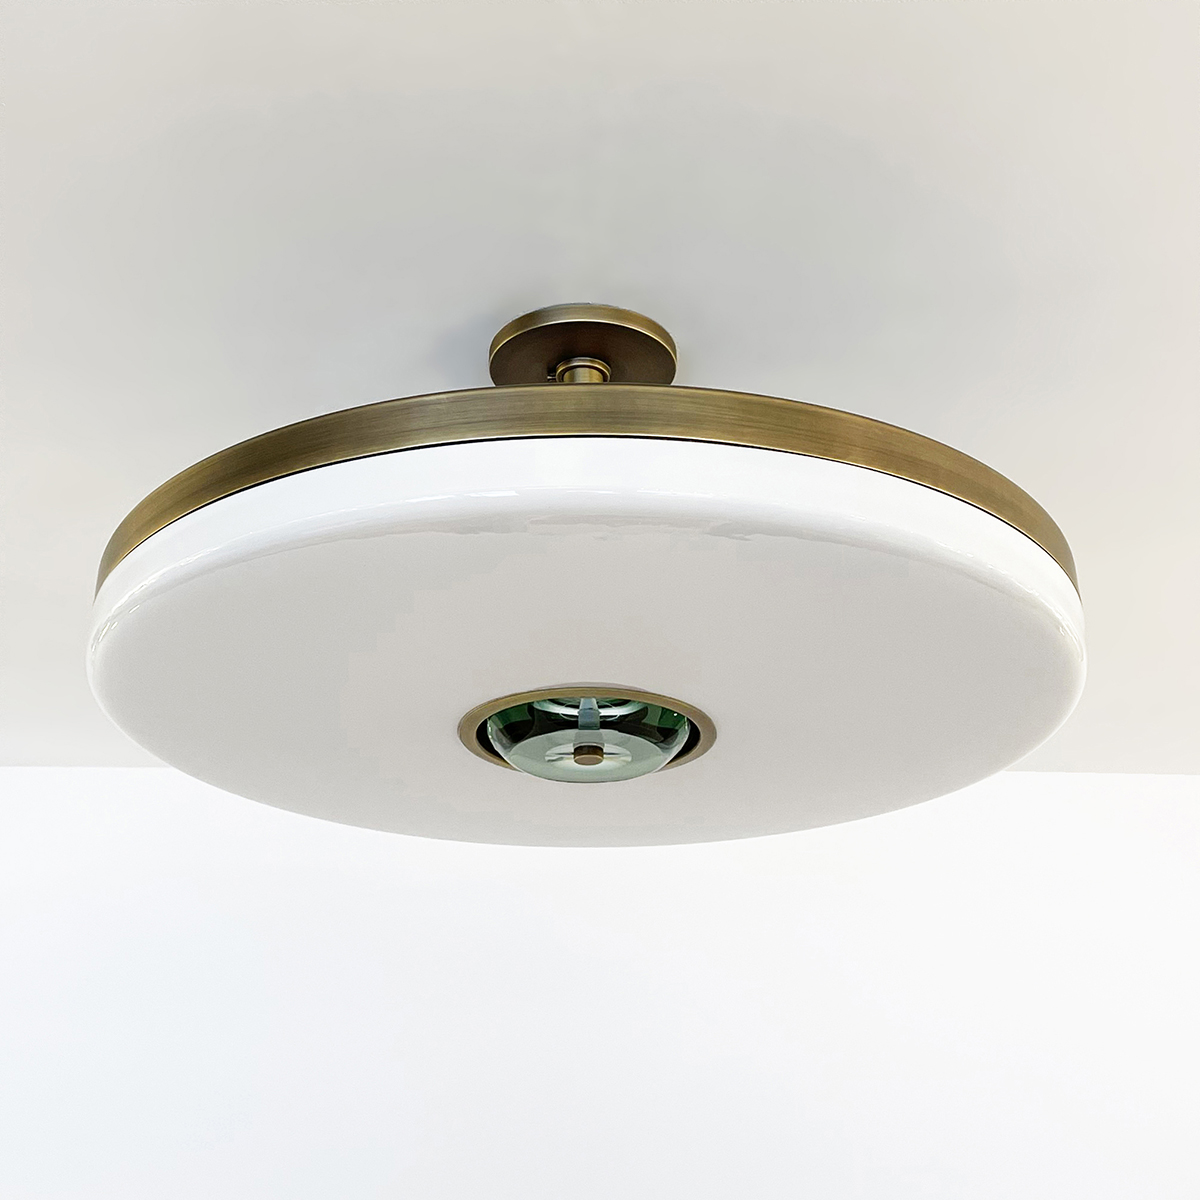 Saturno Ceiling Light by form A, gaspare asaro